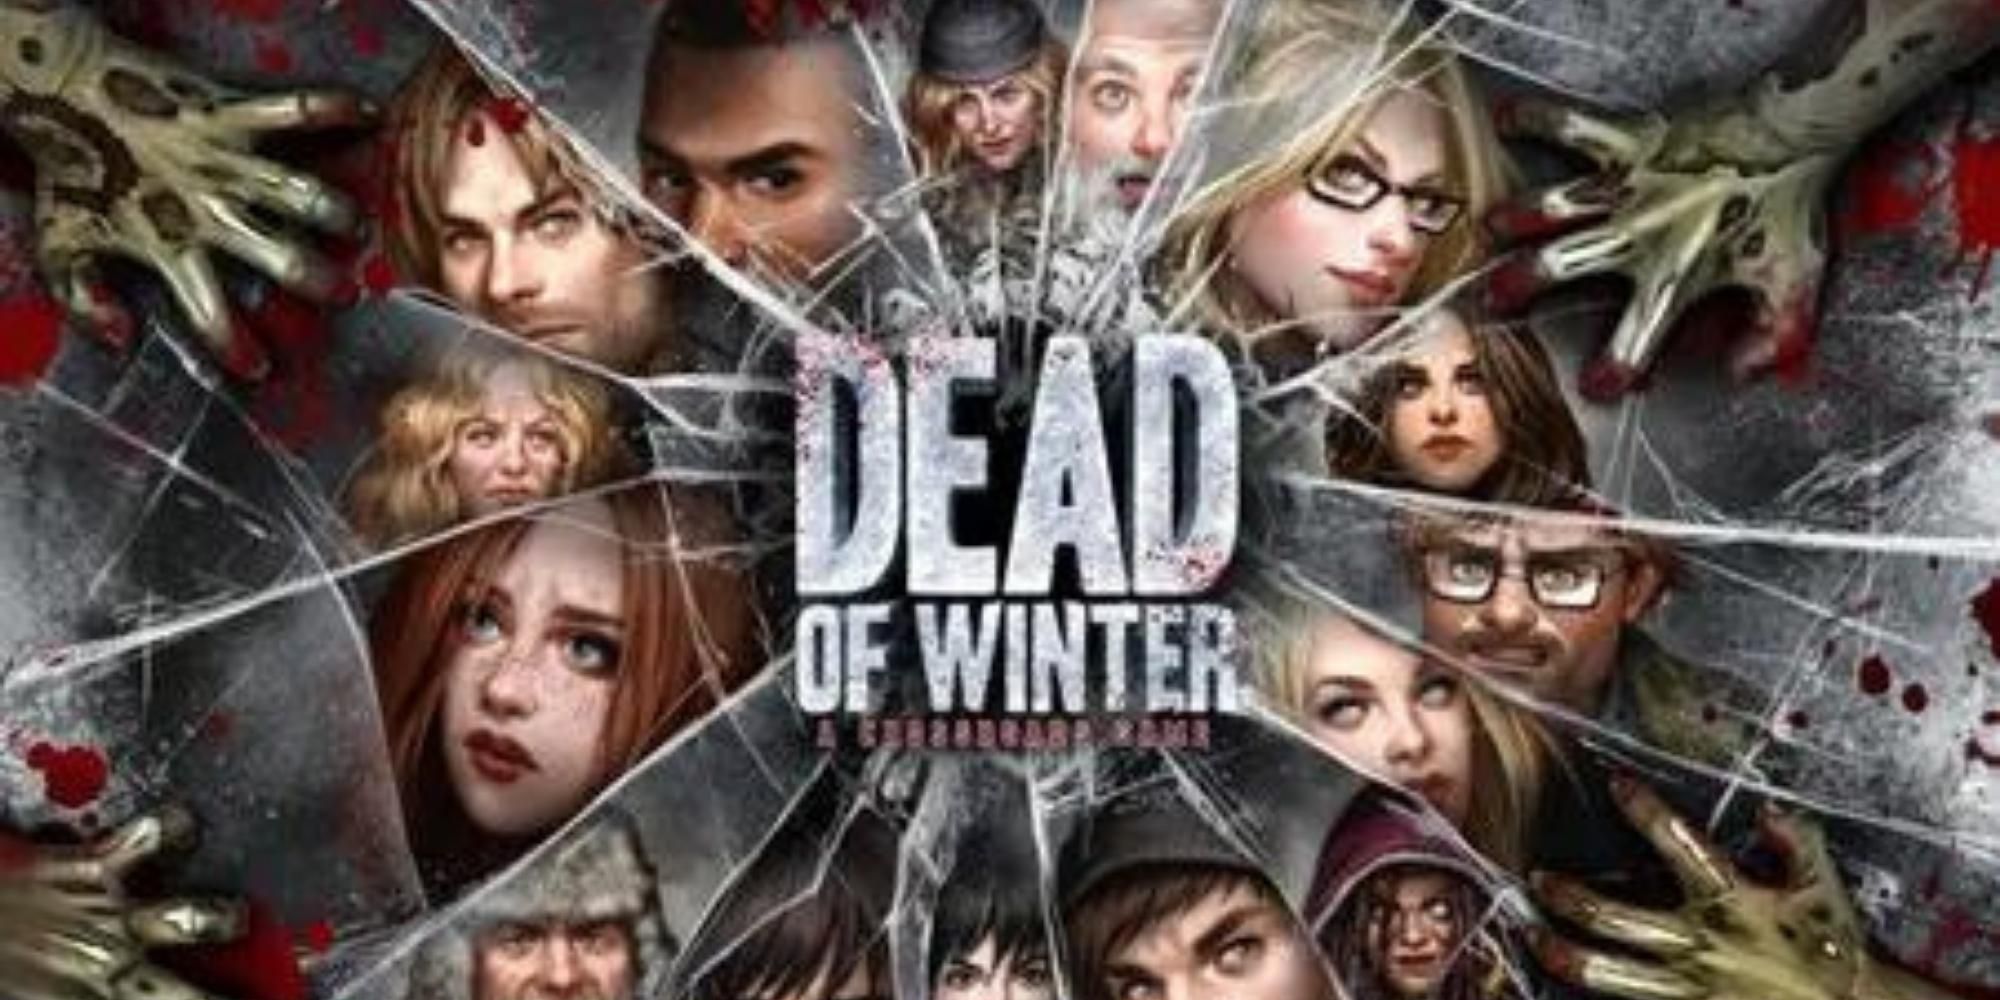 characters in Dead of Winter